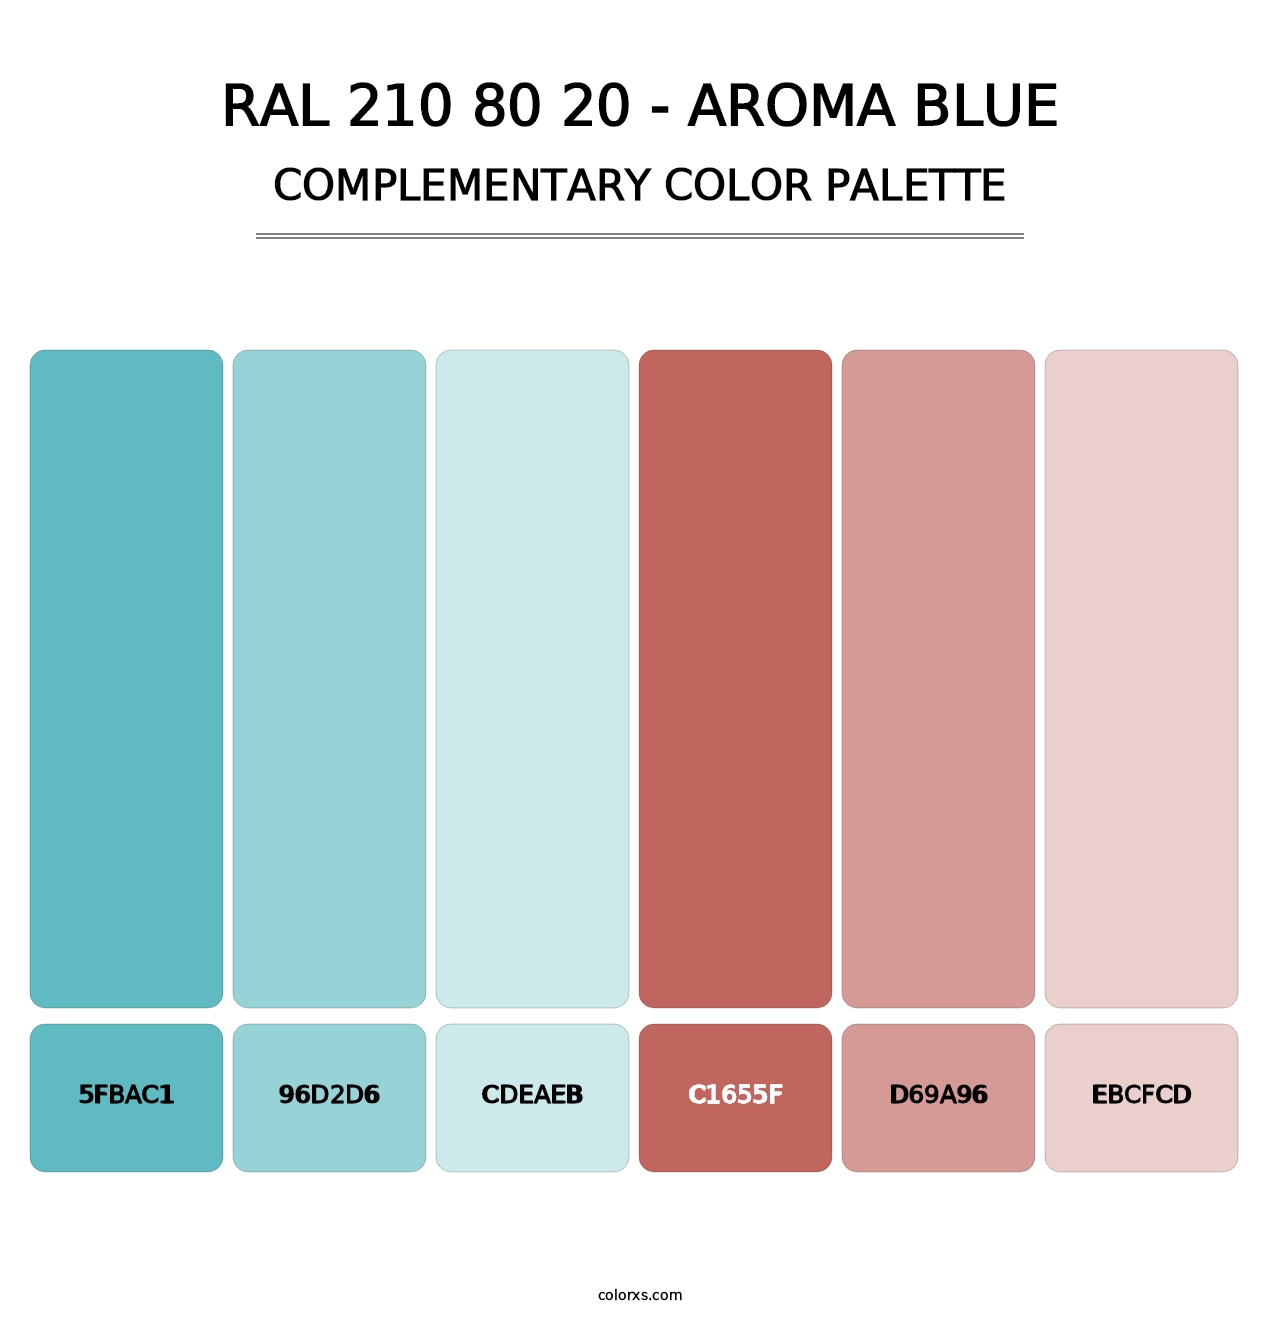 RAL 210 80 20 - Aroma Blue - Complementary Color Palette